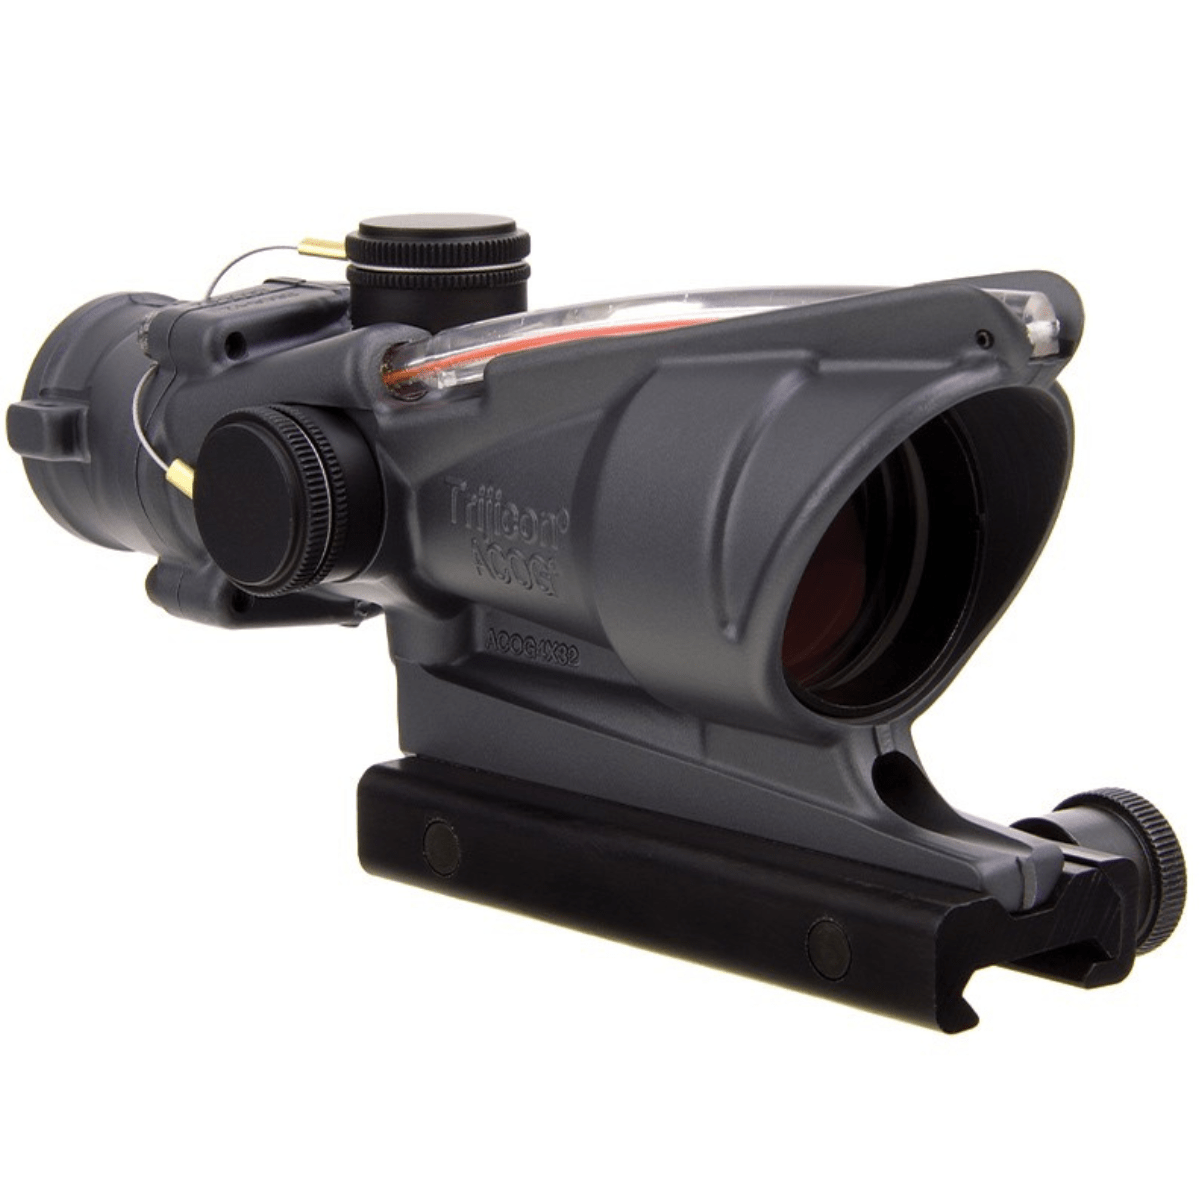 Trijicon ACOG 4x32mm RifleScope, Front Angle View